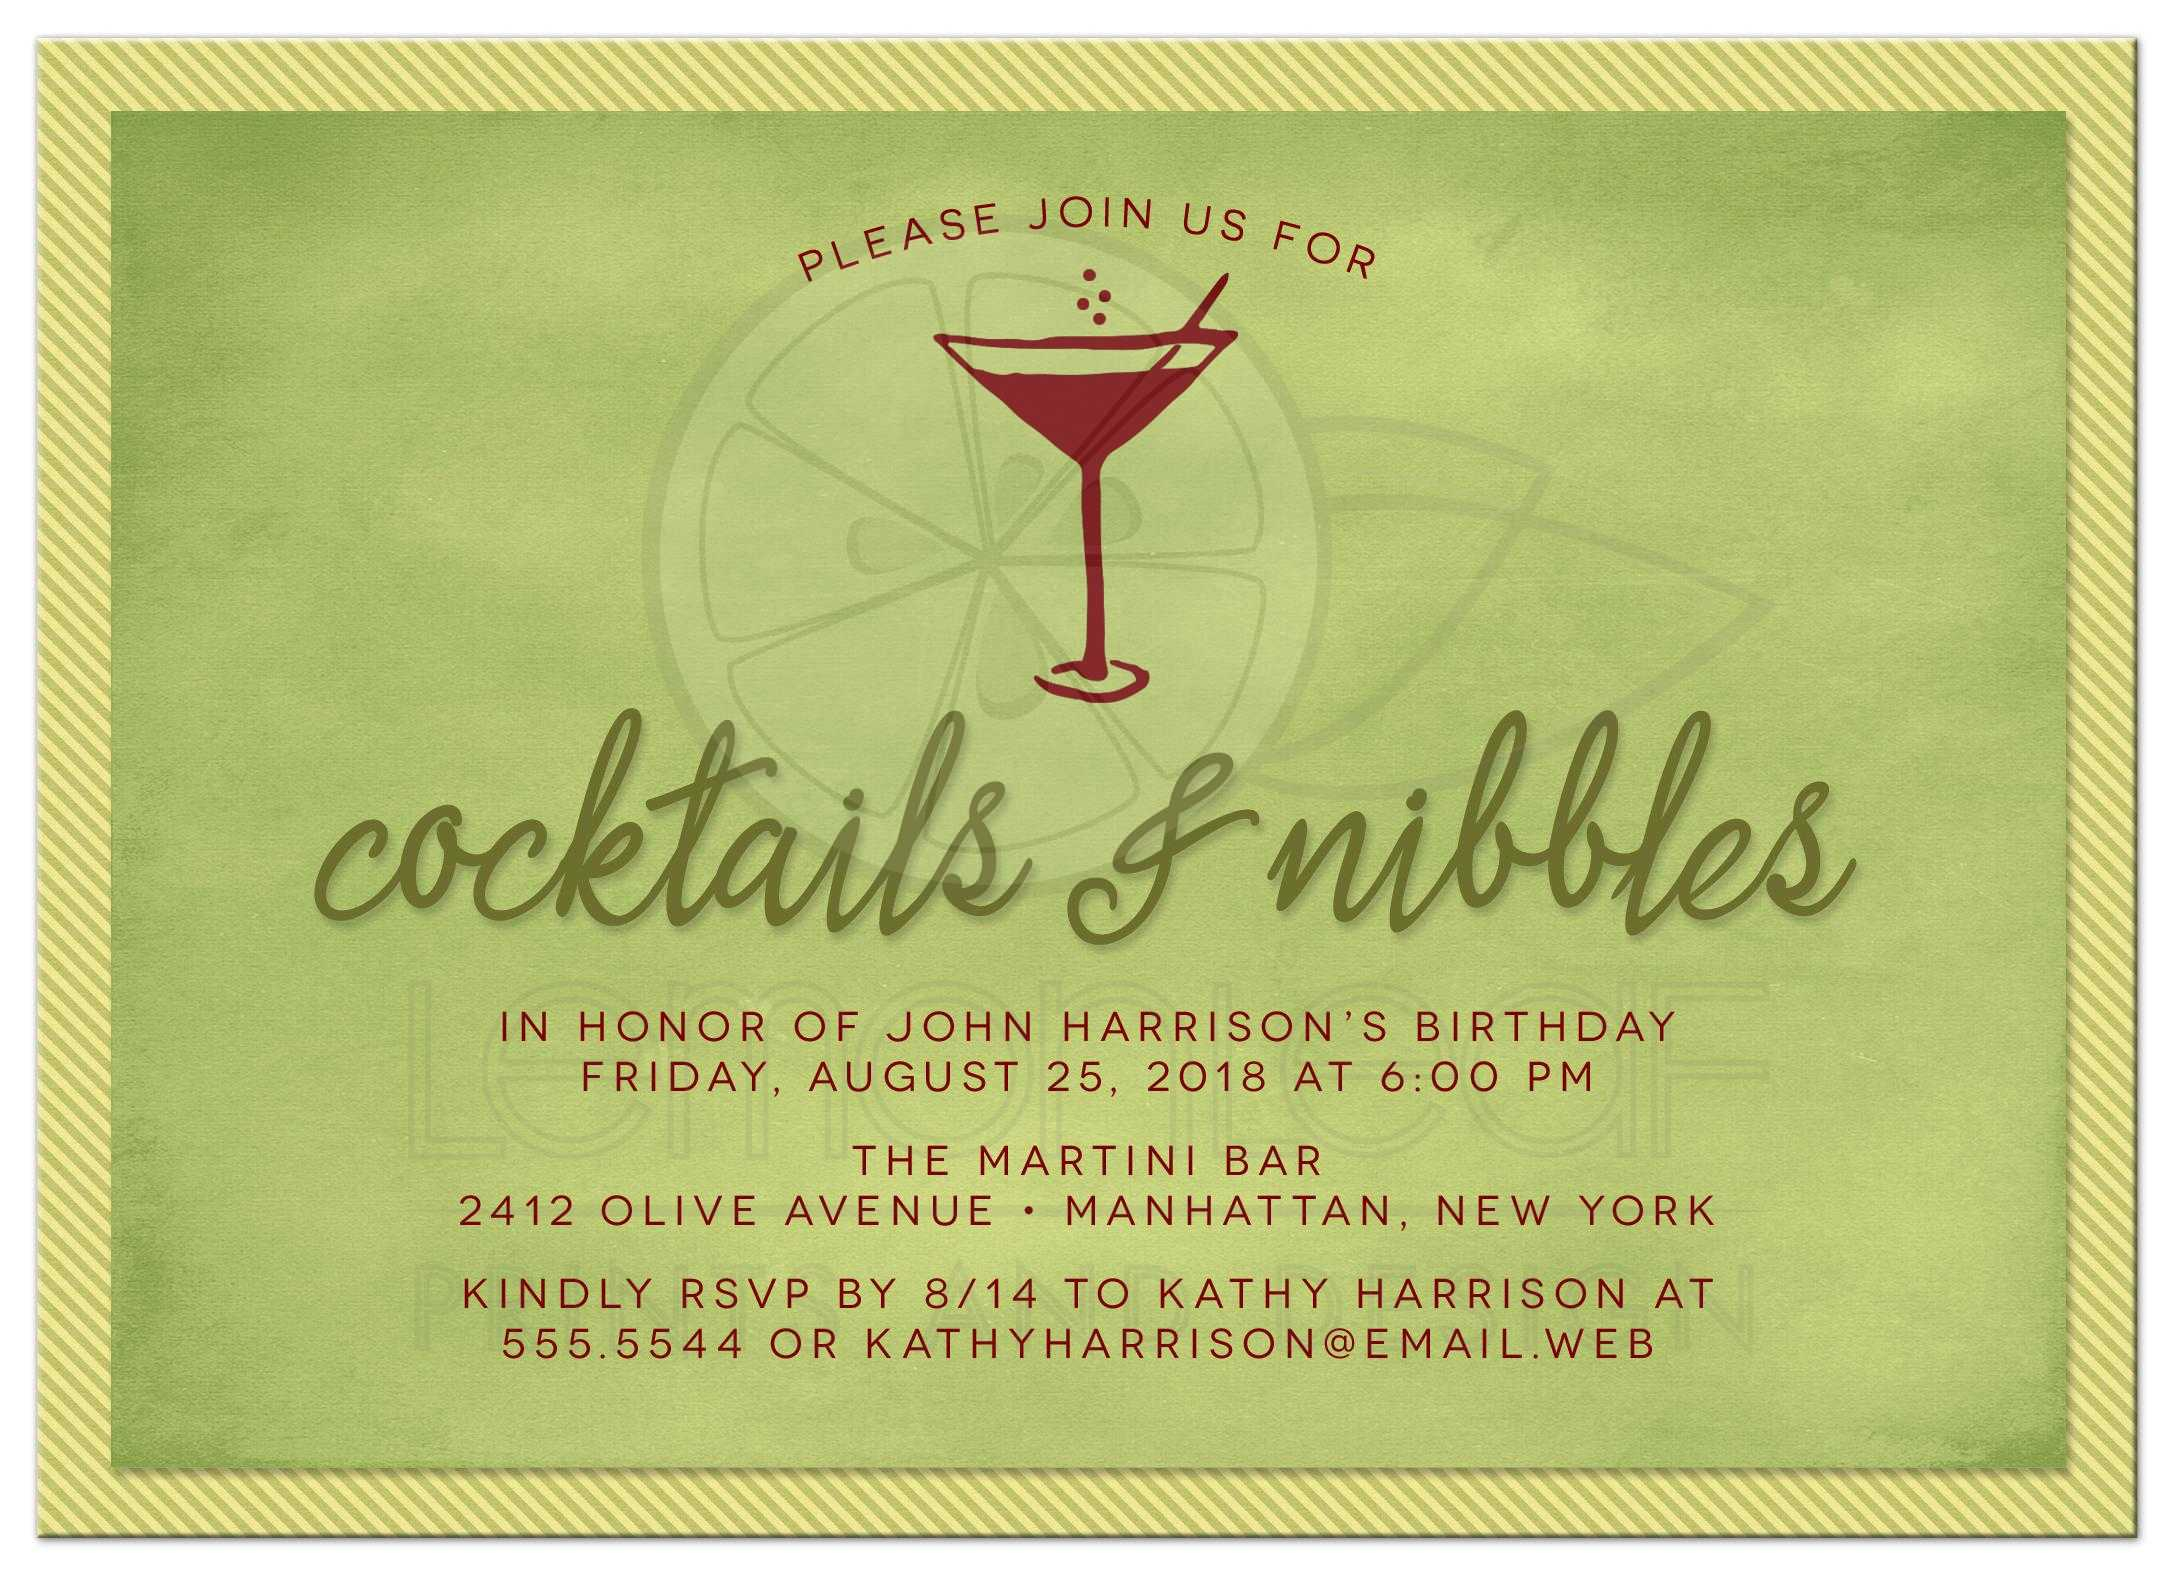 drinks-and-nibbles-invitation-templates-business-template-ideas